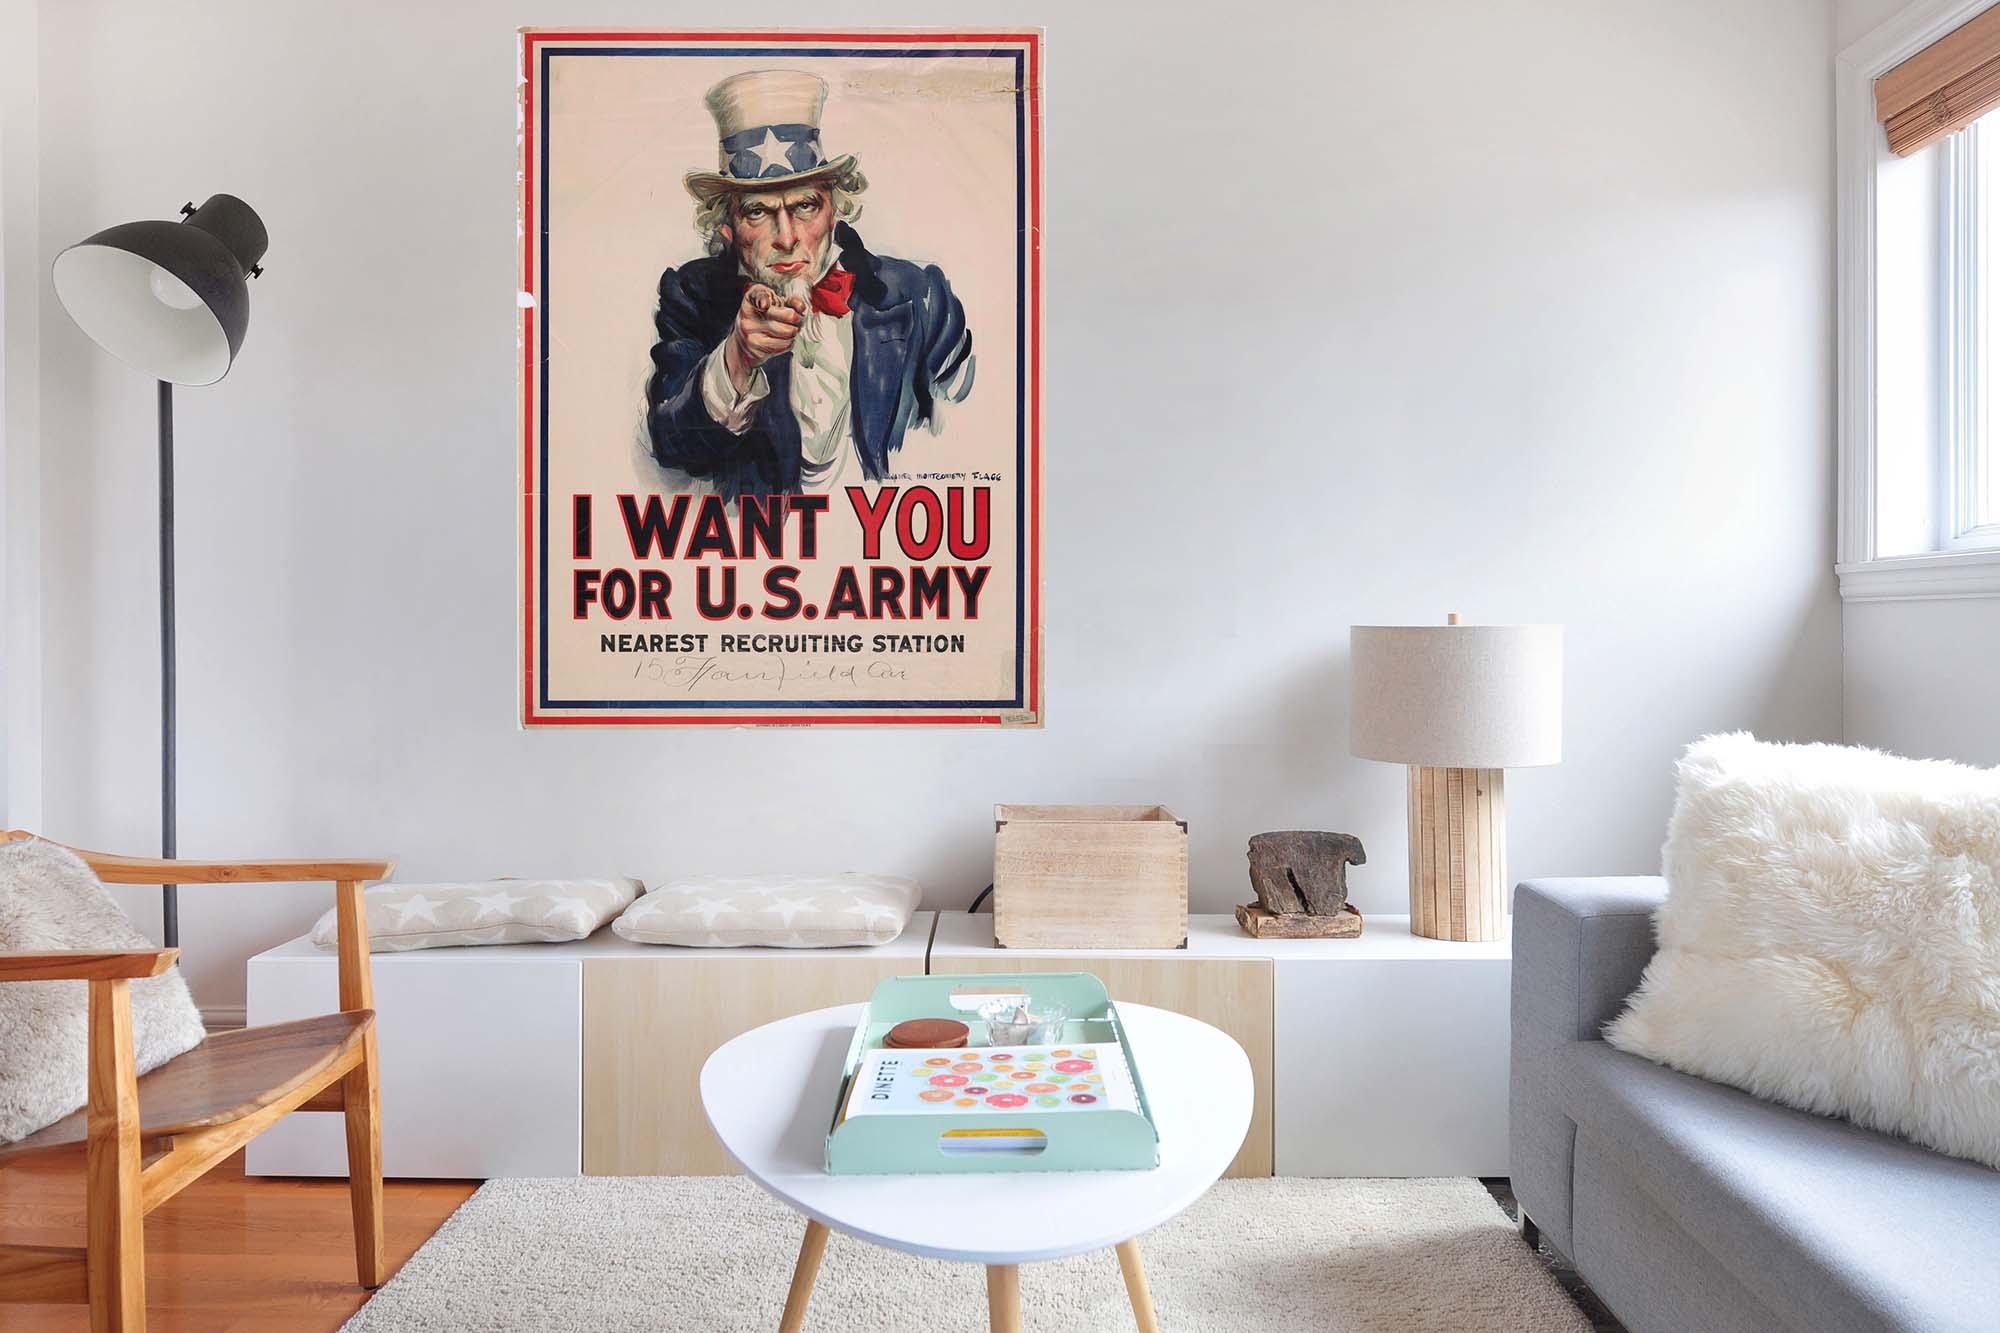 CoolWalls.ca diecut I Want You Vintage Poster, Wall Decal Sticker Wallpaper, PEEL-N-STICK, removable anytime. Great for a classroom